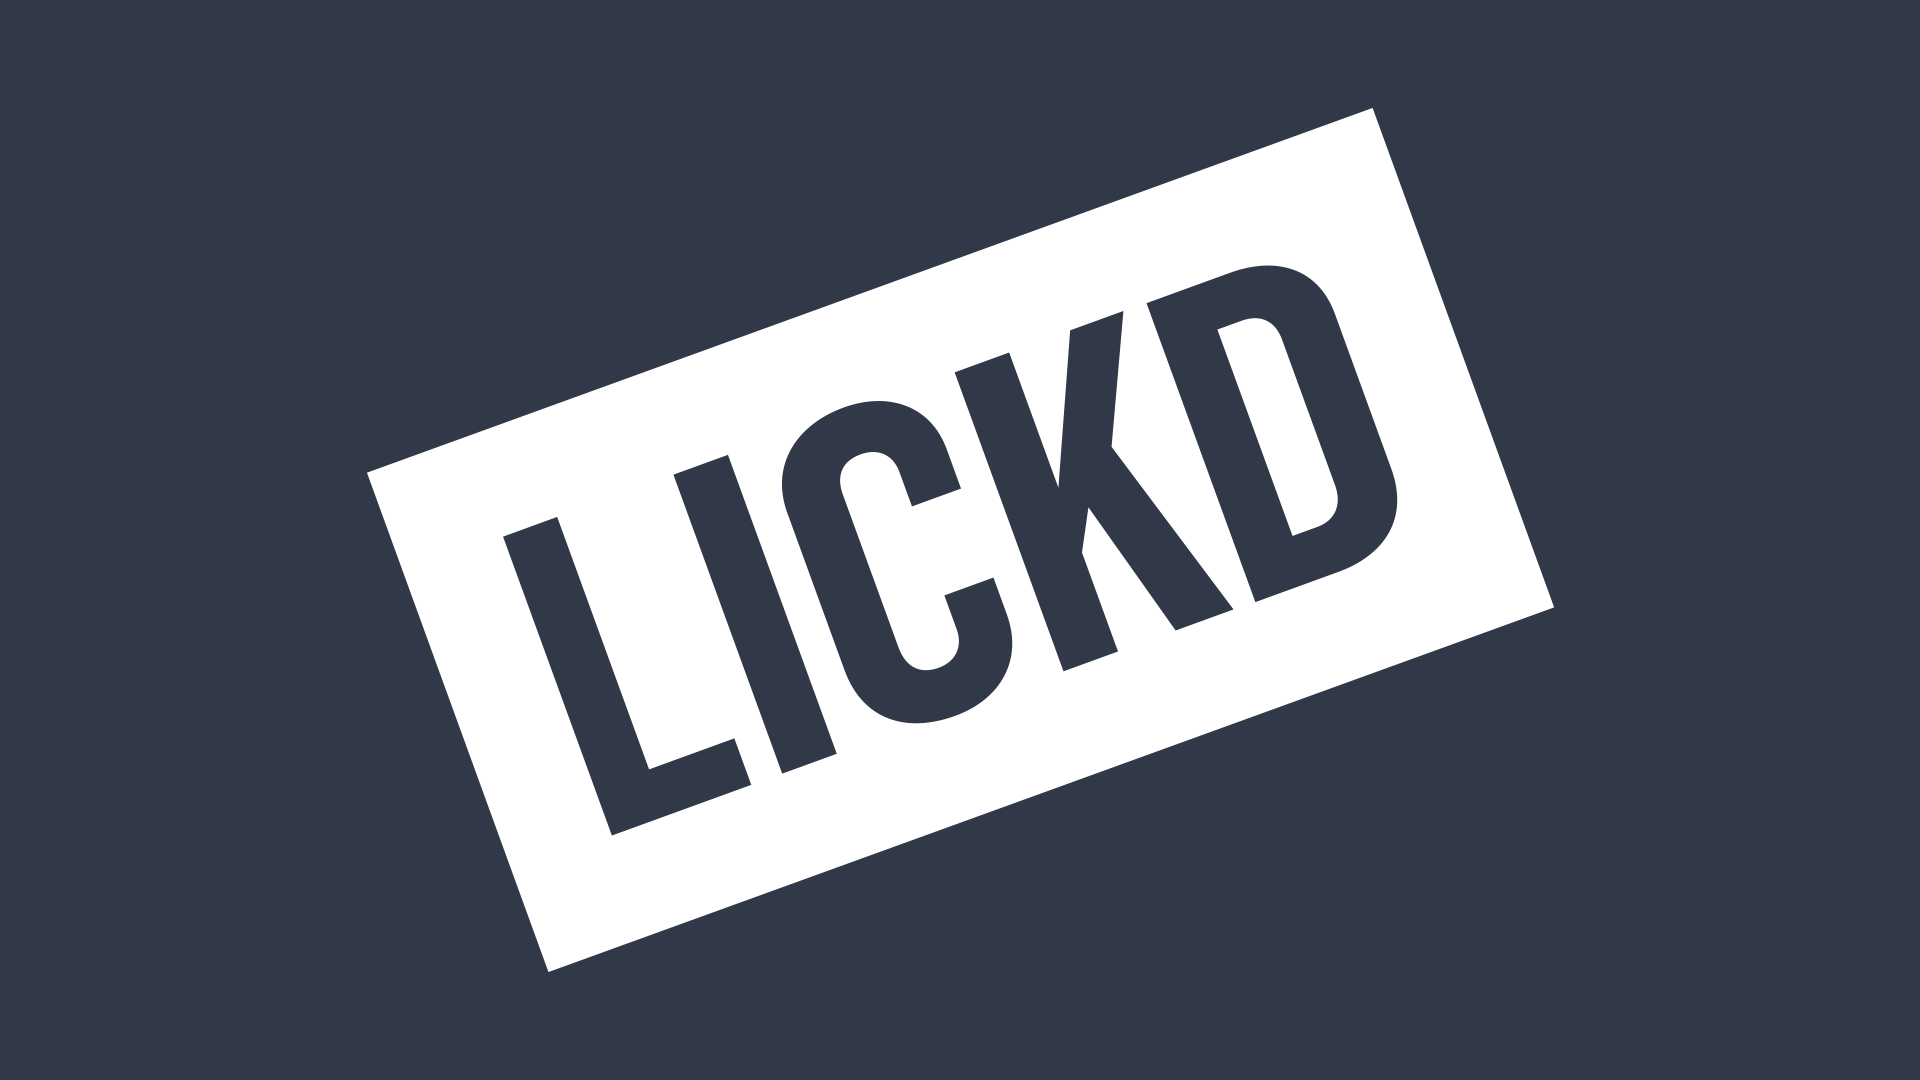 Ready go to ... https://go.lickd.co/Music [ Commercial Music Licensing For YouTube | Lickd]